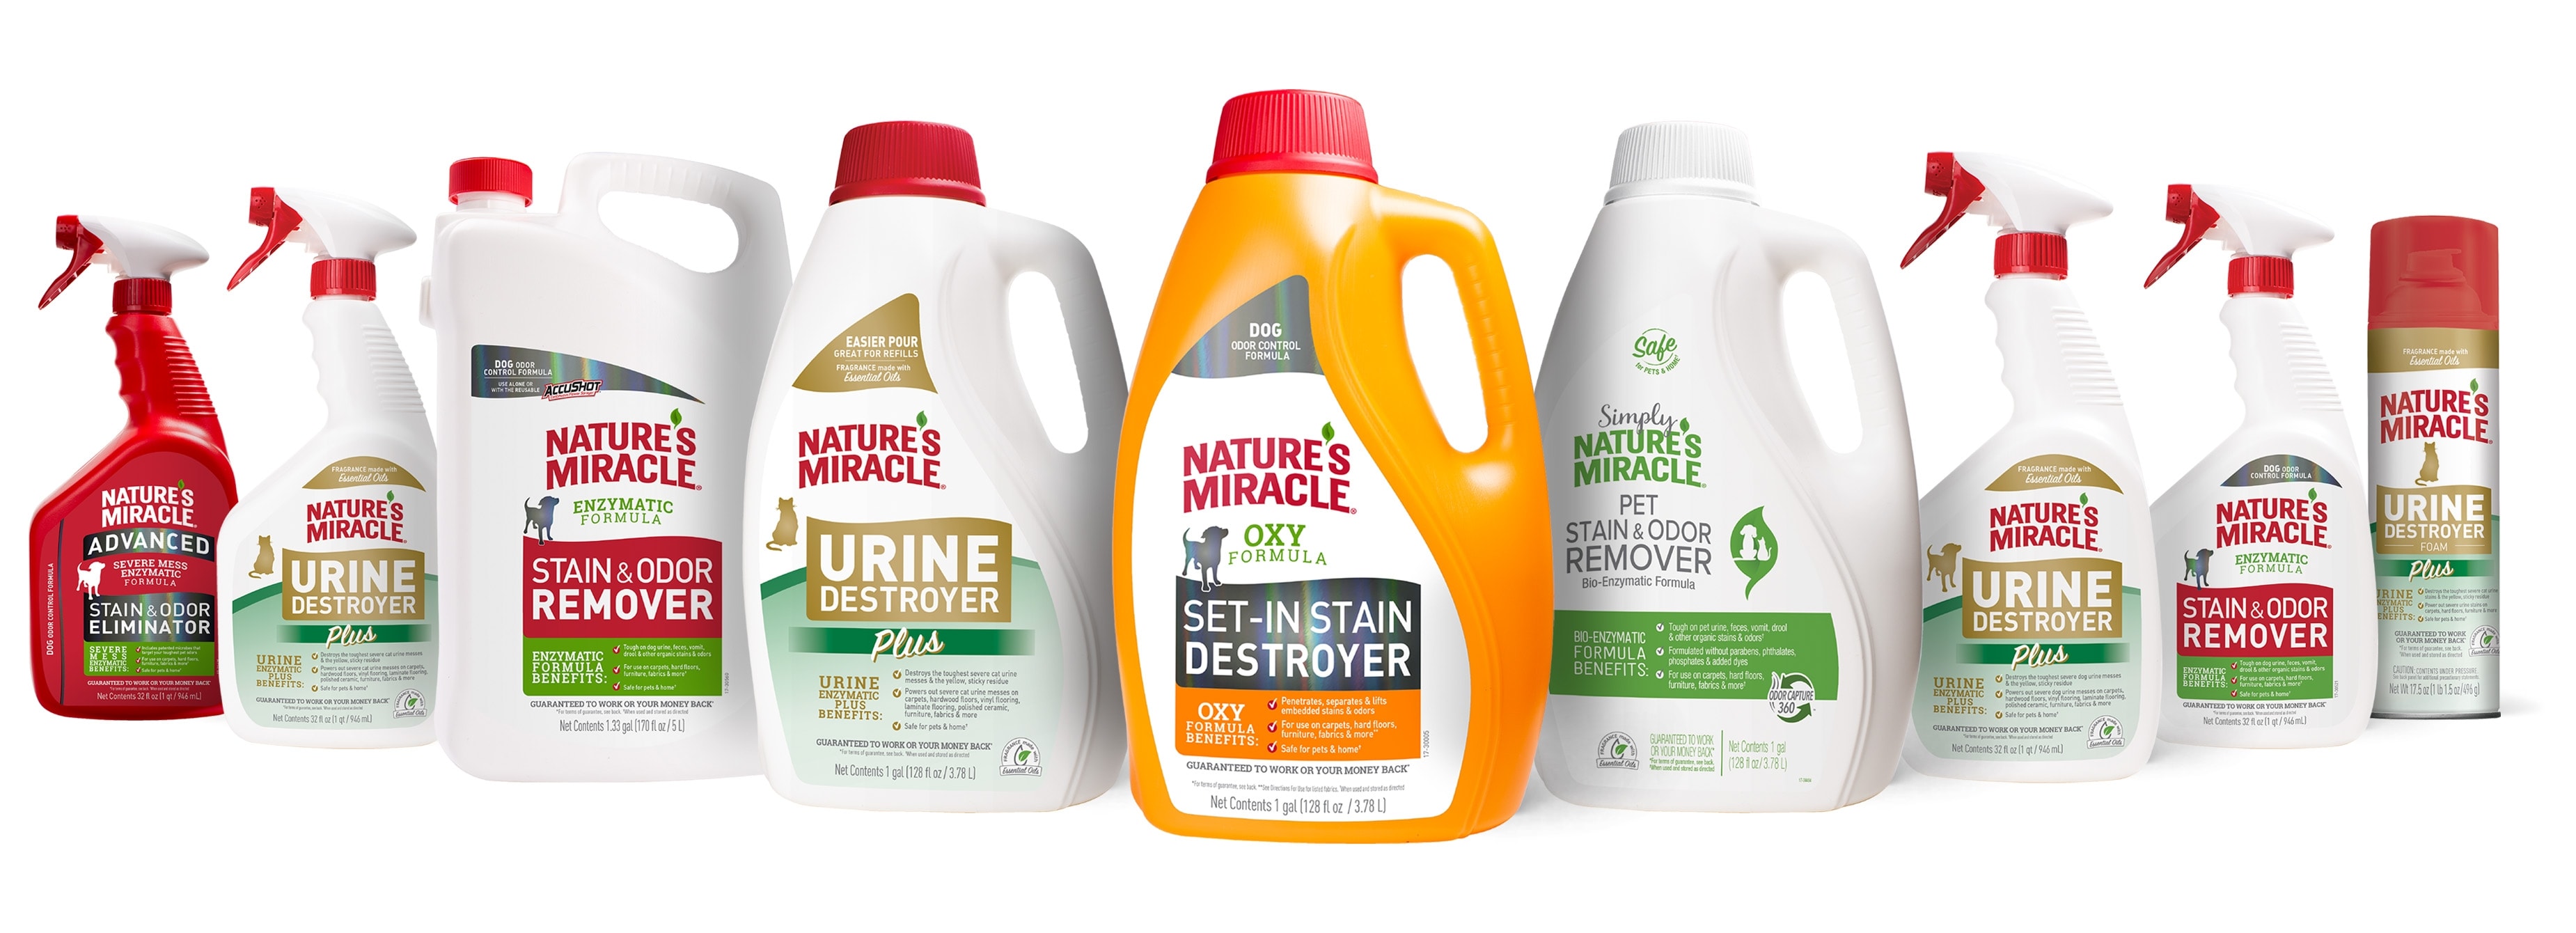 NATURE'S MIRACLE Advanced Dog Enzymatic Stain Remover & Odor Eliminator  Spray, 32-oz bottle 